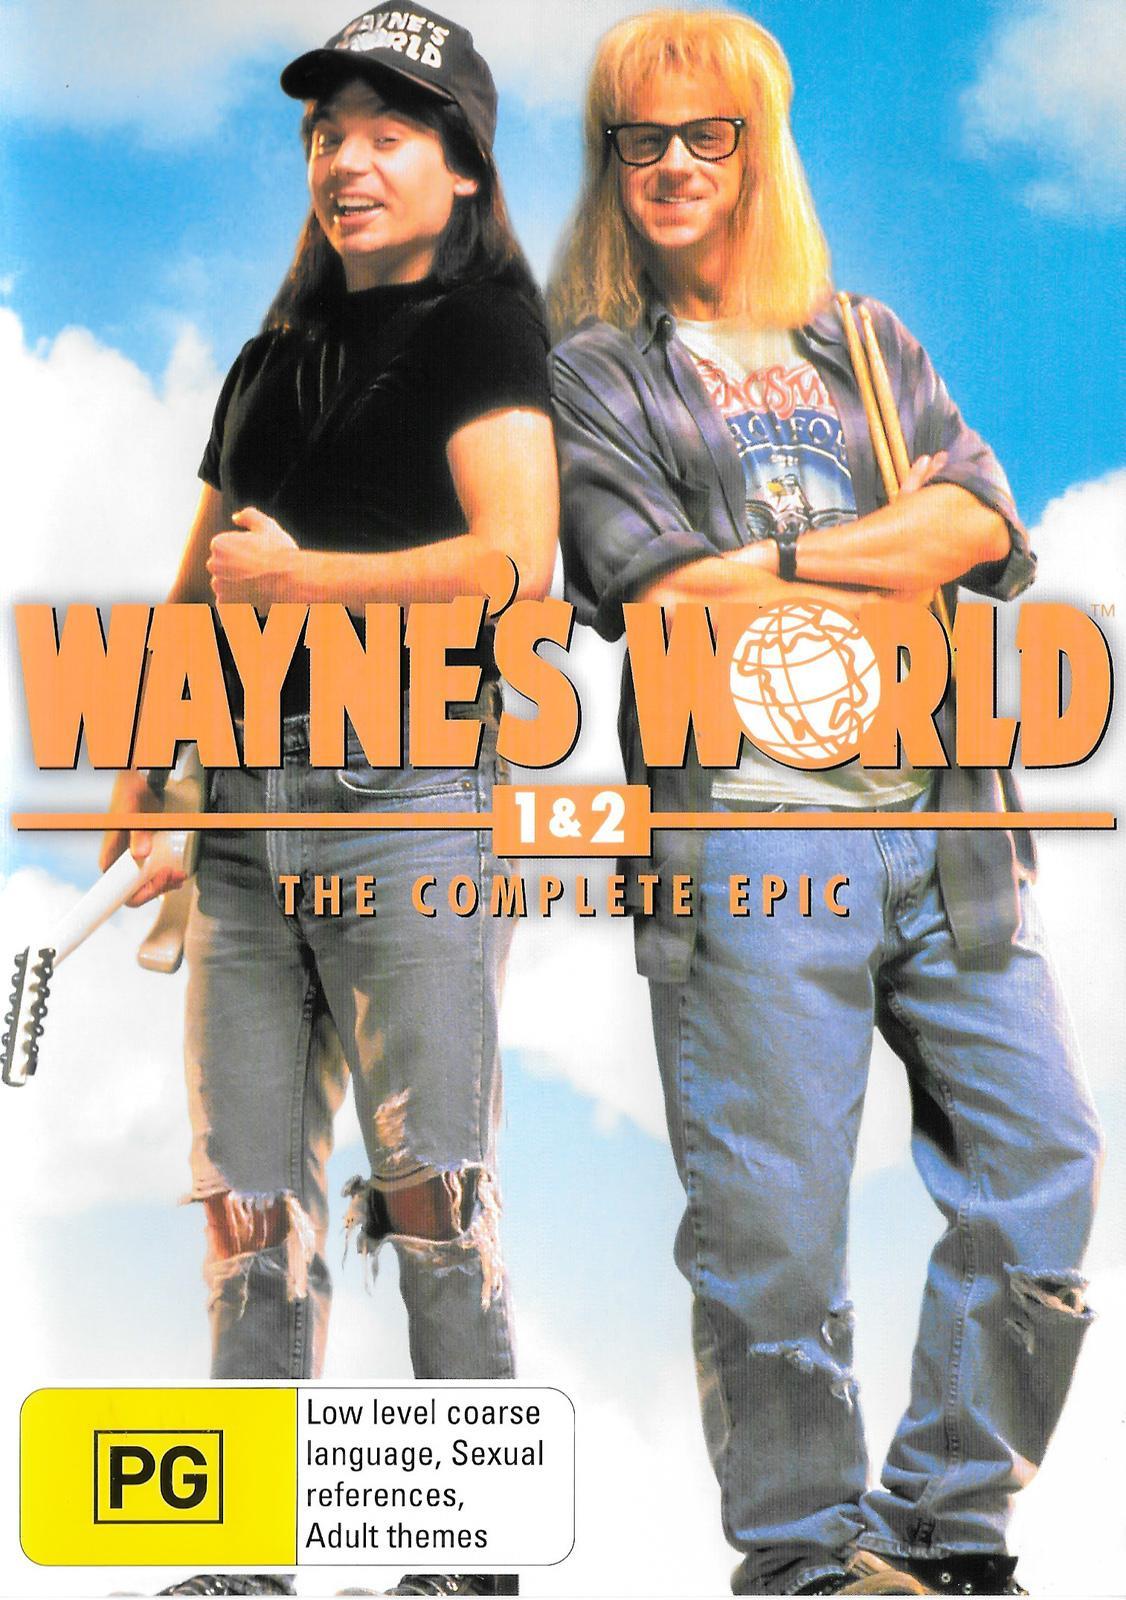 Wayne's Worlds 1&2 -Rare DVD Aus Stock -Family PREOWNED: DISC LIKE NEW